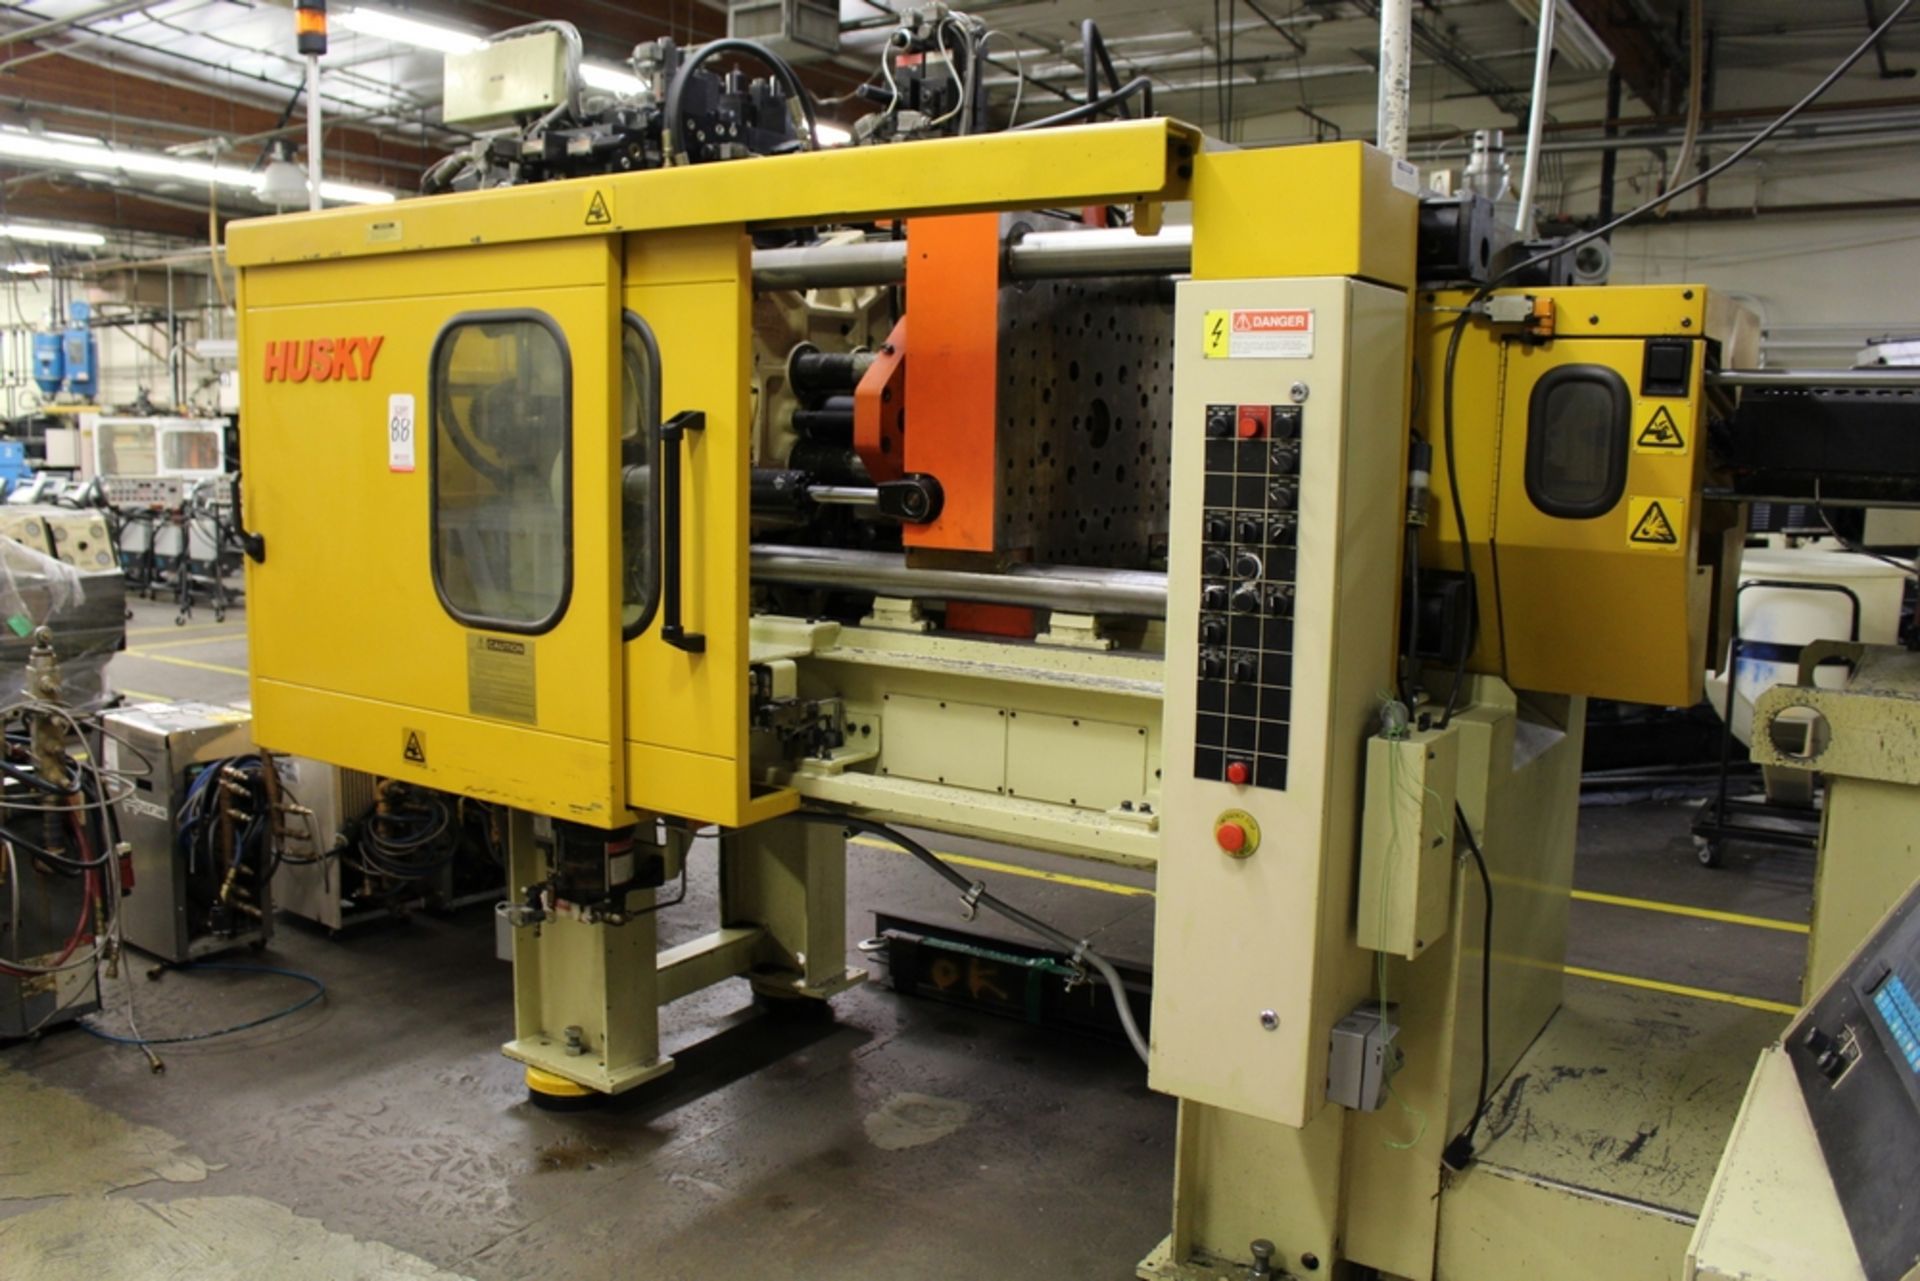 1995 HUSKY 225-TON INJECTION MOLDING MACHINE, MODEL CX160 RS42/42, S/N 11831, 31.5" X 31.5" PLATENS, - Image 2 of 8